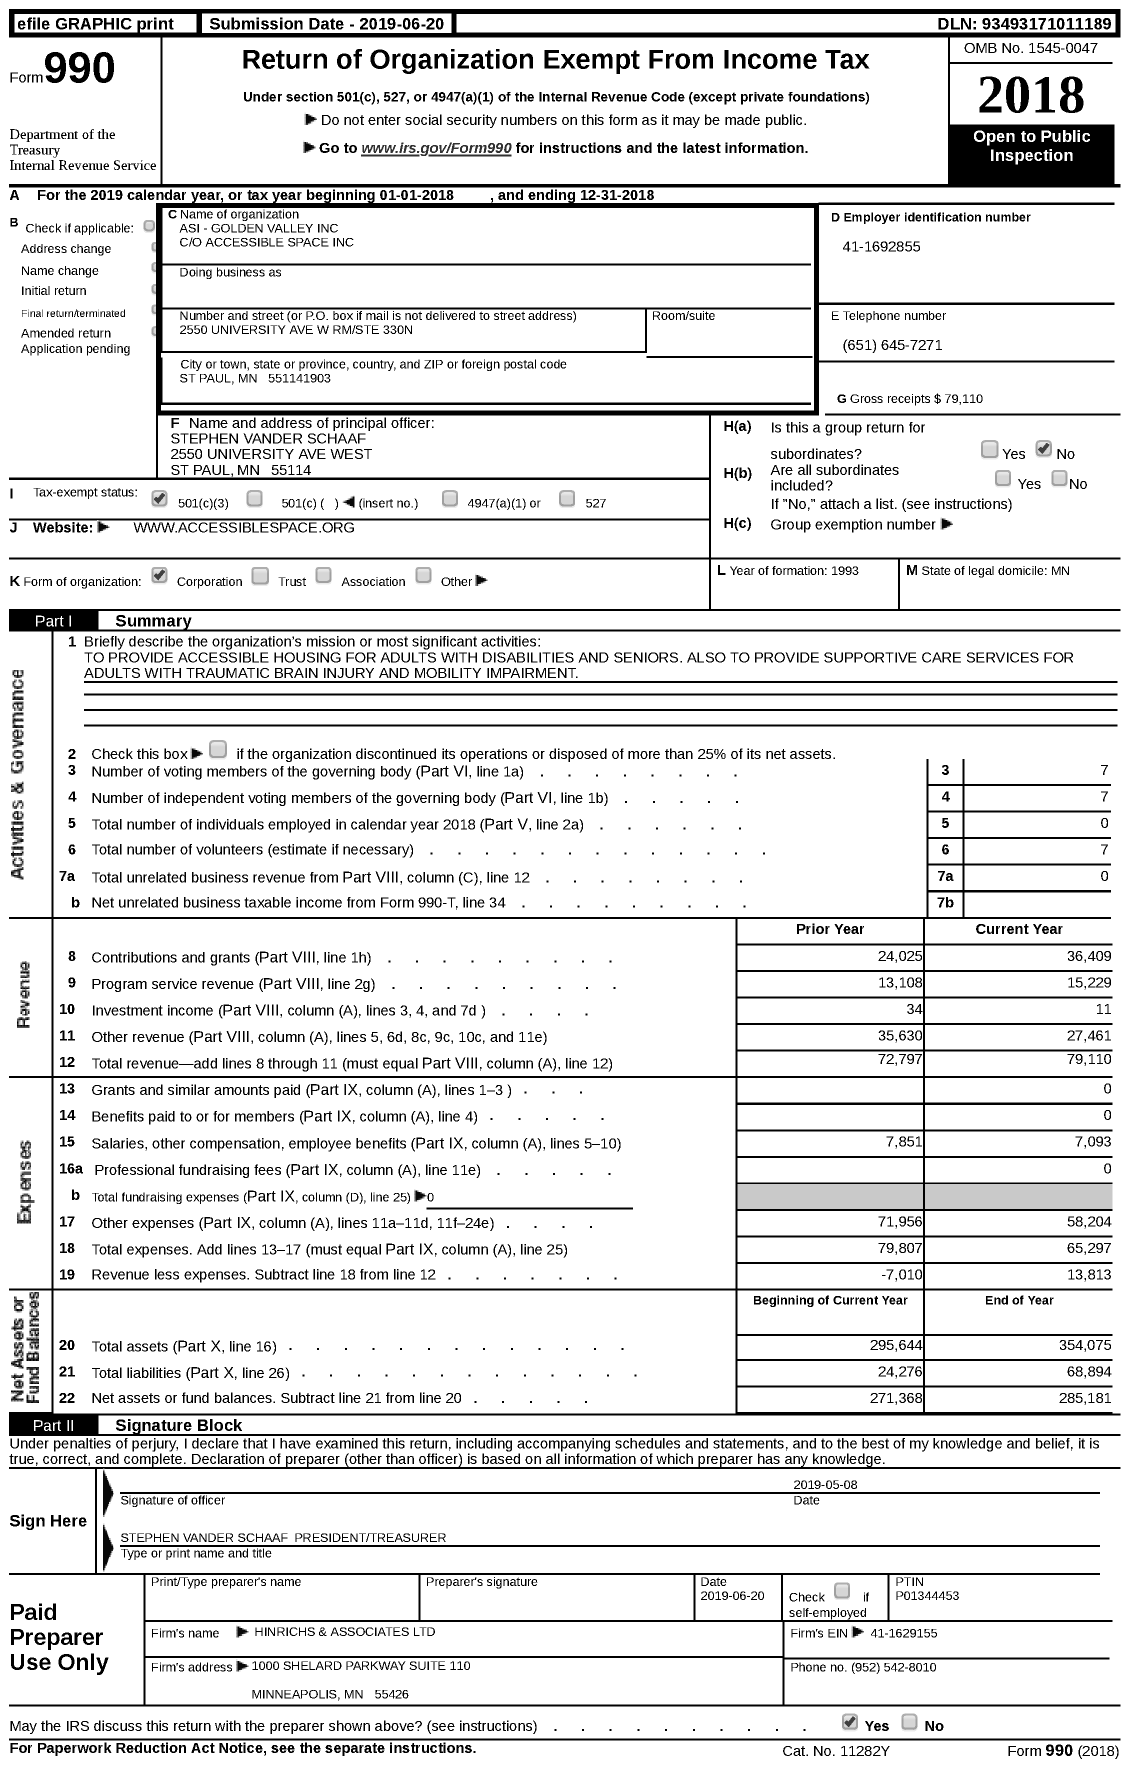 Image of first page of 2018 Form 990 for Asi - Golden Valley